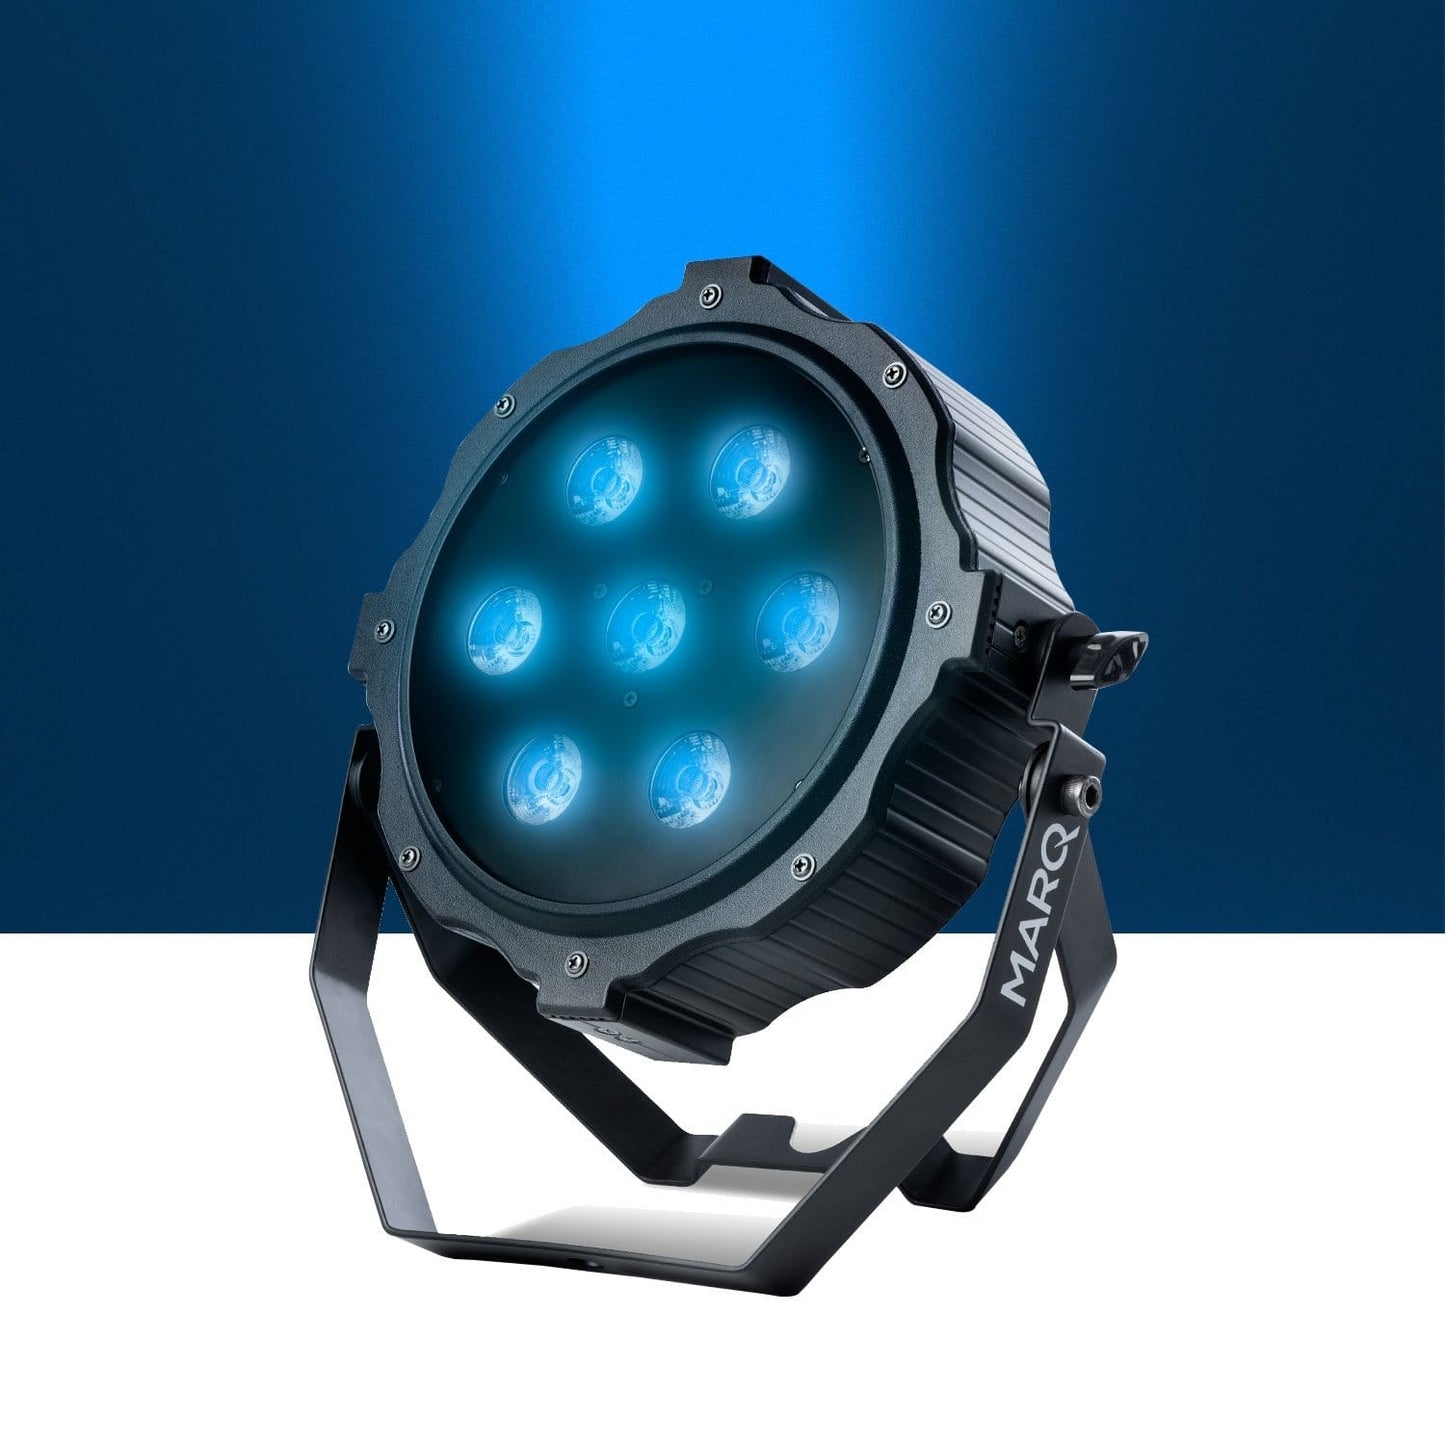 MARQ Gamut PAR H7 Low-Profile 6-in-1 Hex LED Wash Light - ProSound and Stage Lighting